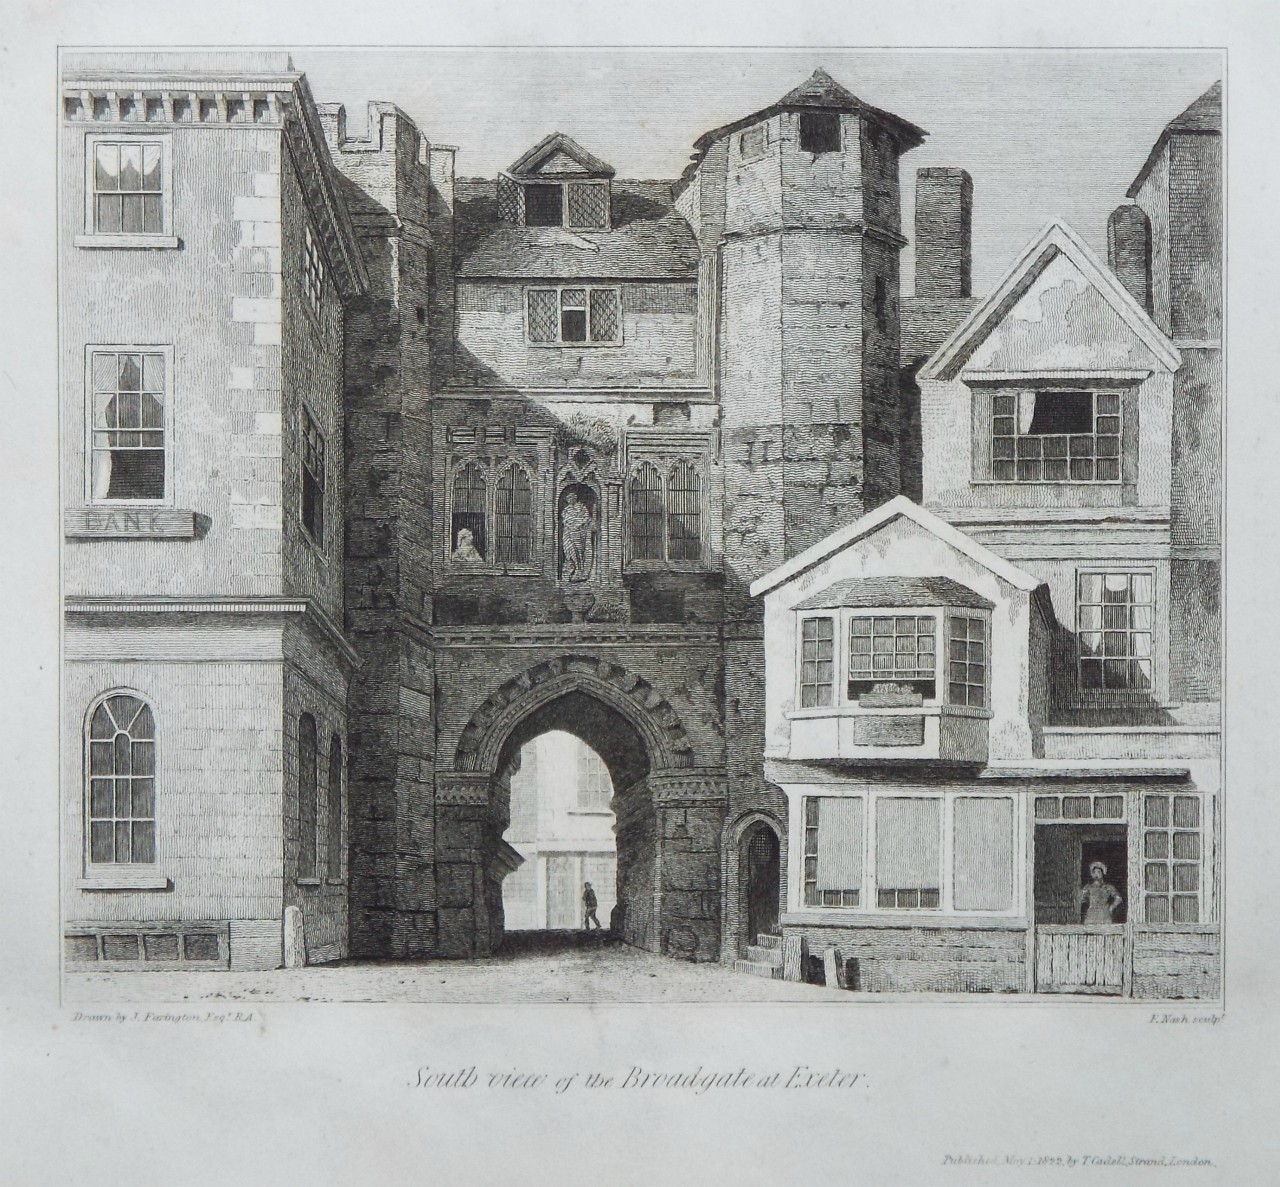 Print - South view of the Broadgate at Exeter. - Nash